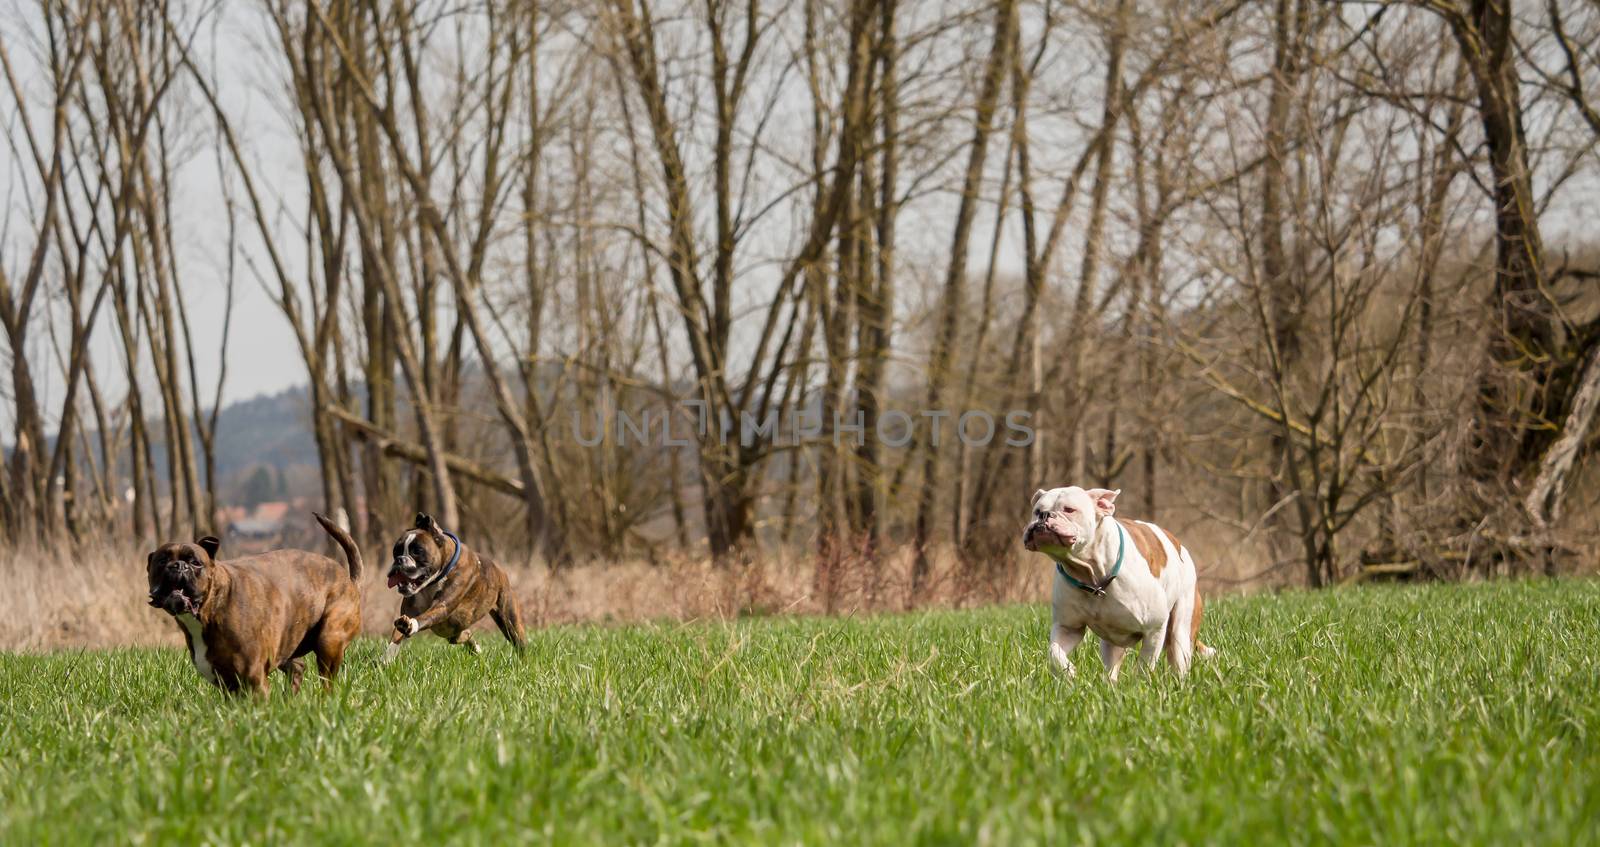 Boxers are playing outside in the meadow